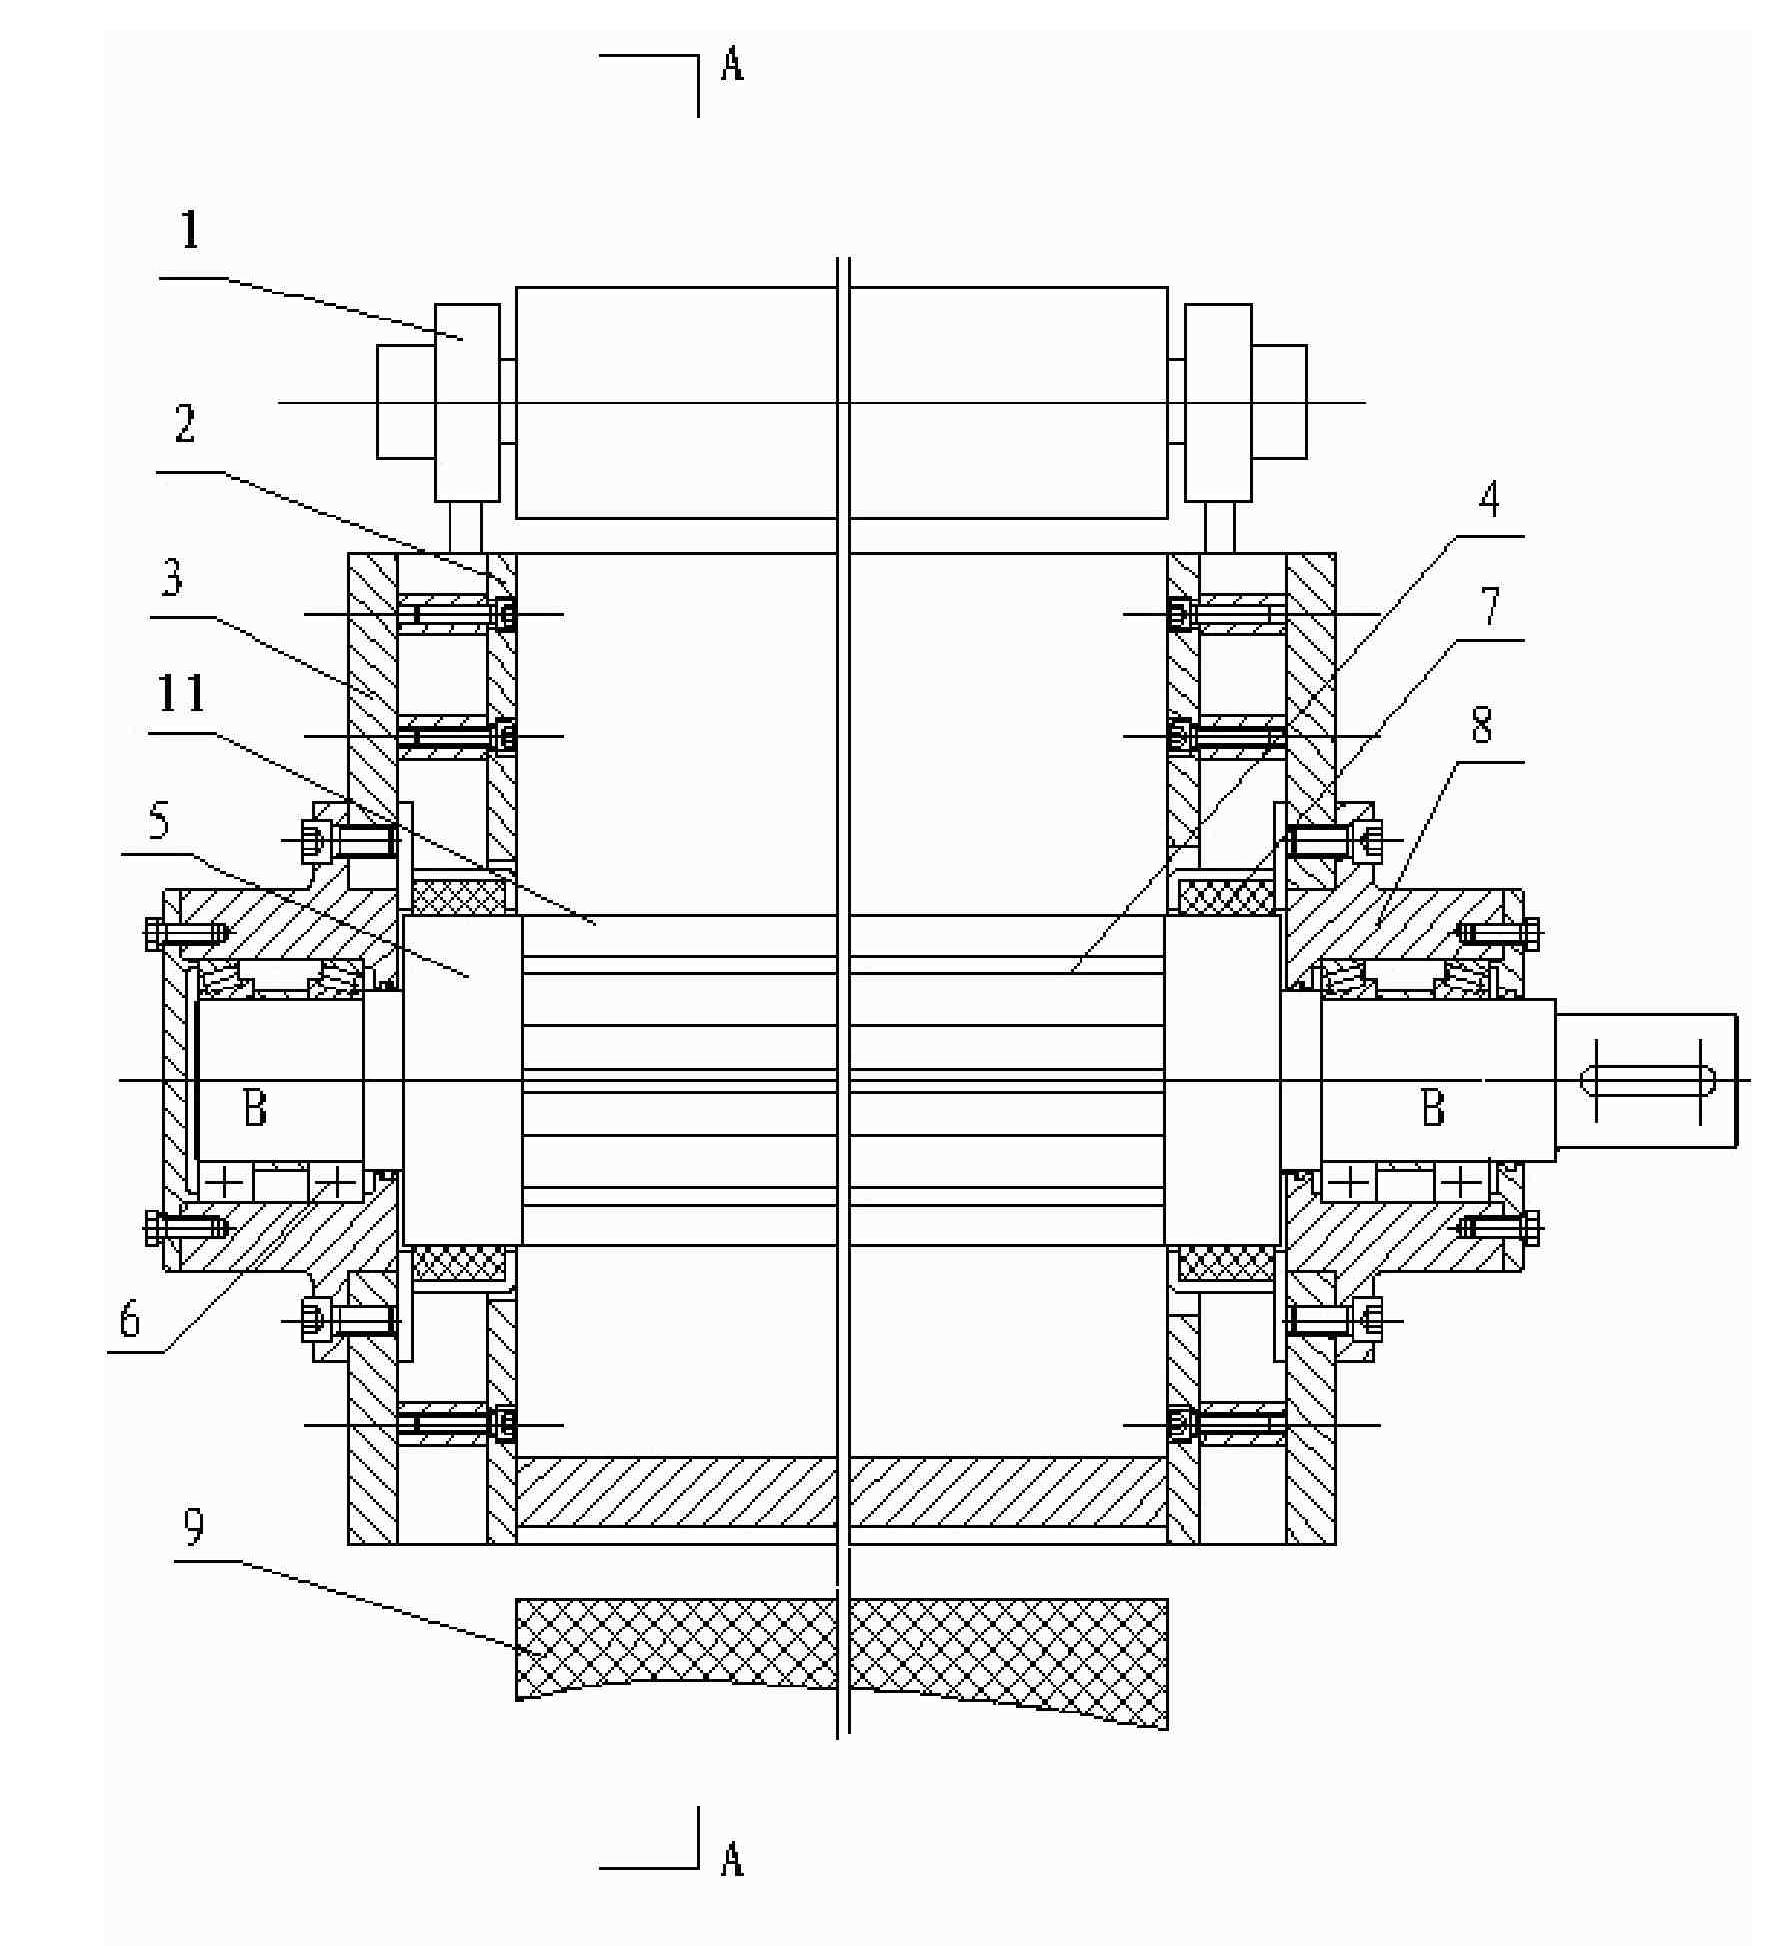 Feeding apparatus for feeding to rotary hearth furnace turntable and feeding system of rotary hearth furnace